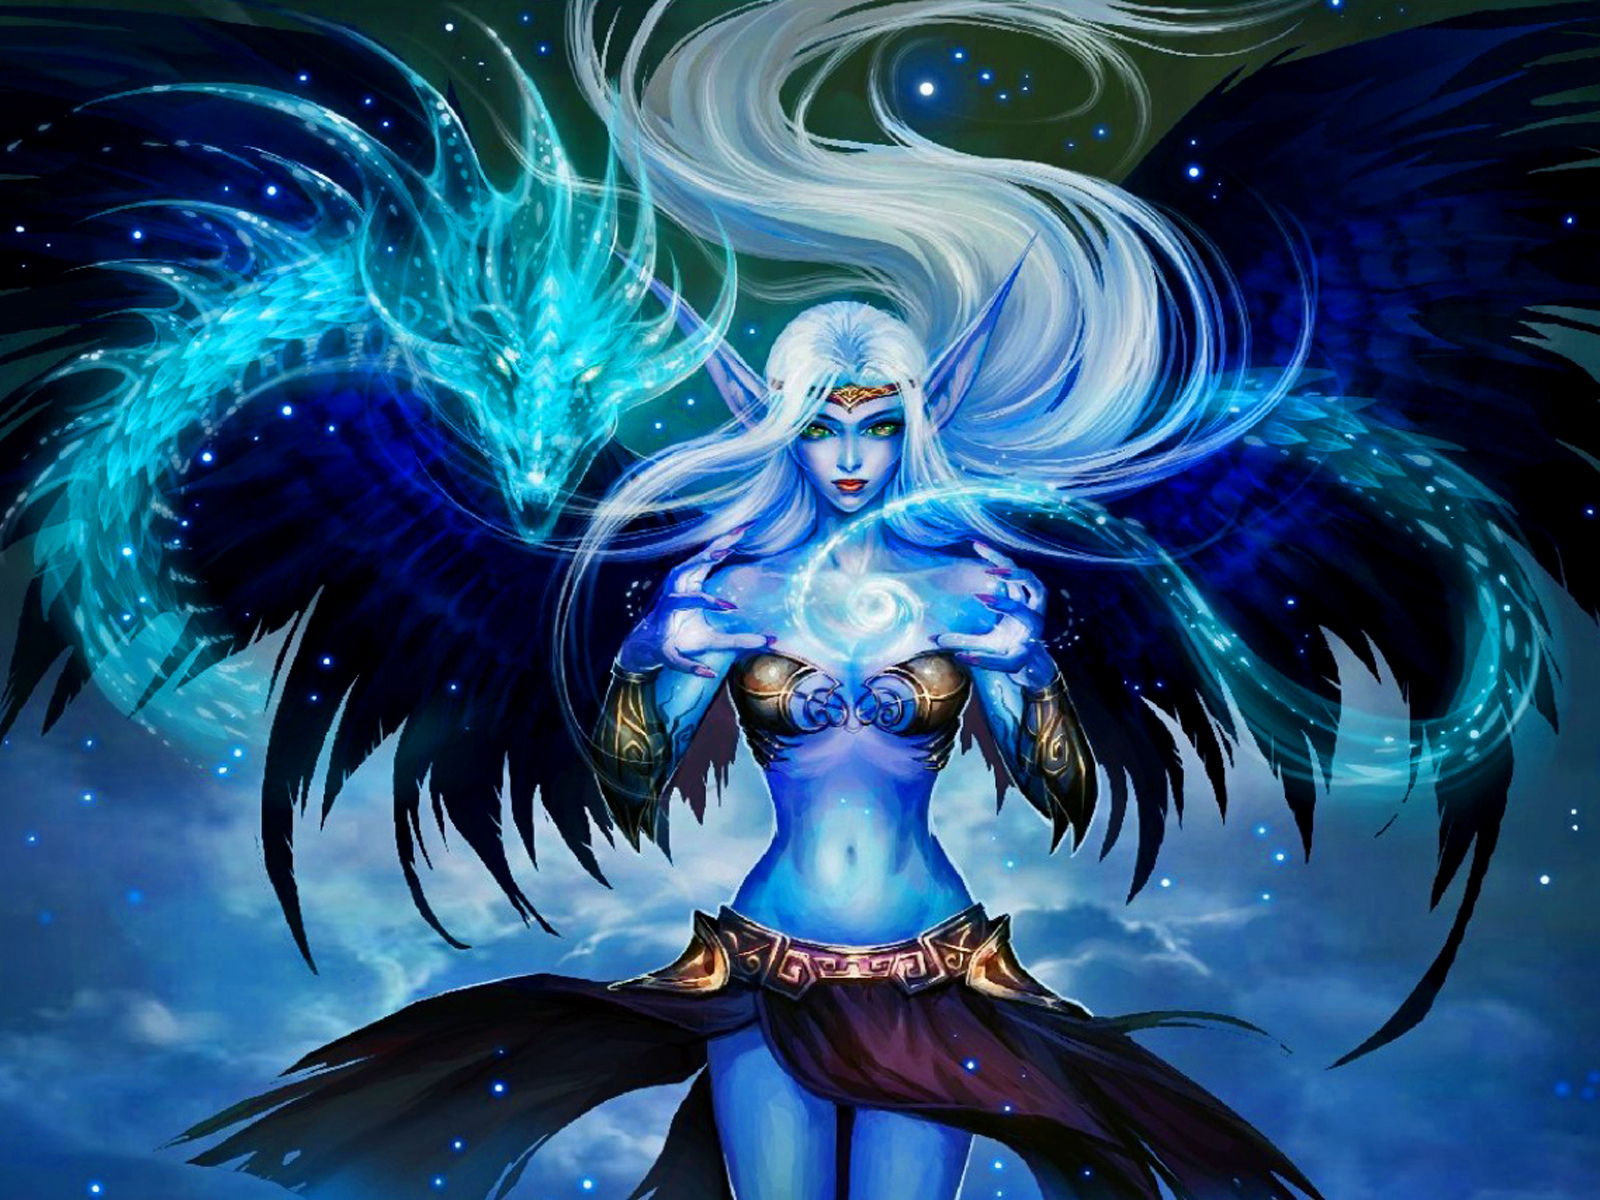 Fallen Angel Morgan's character in the game League Of Legends